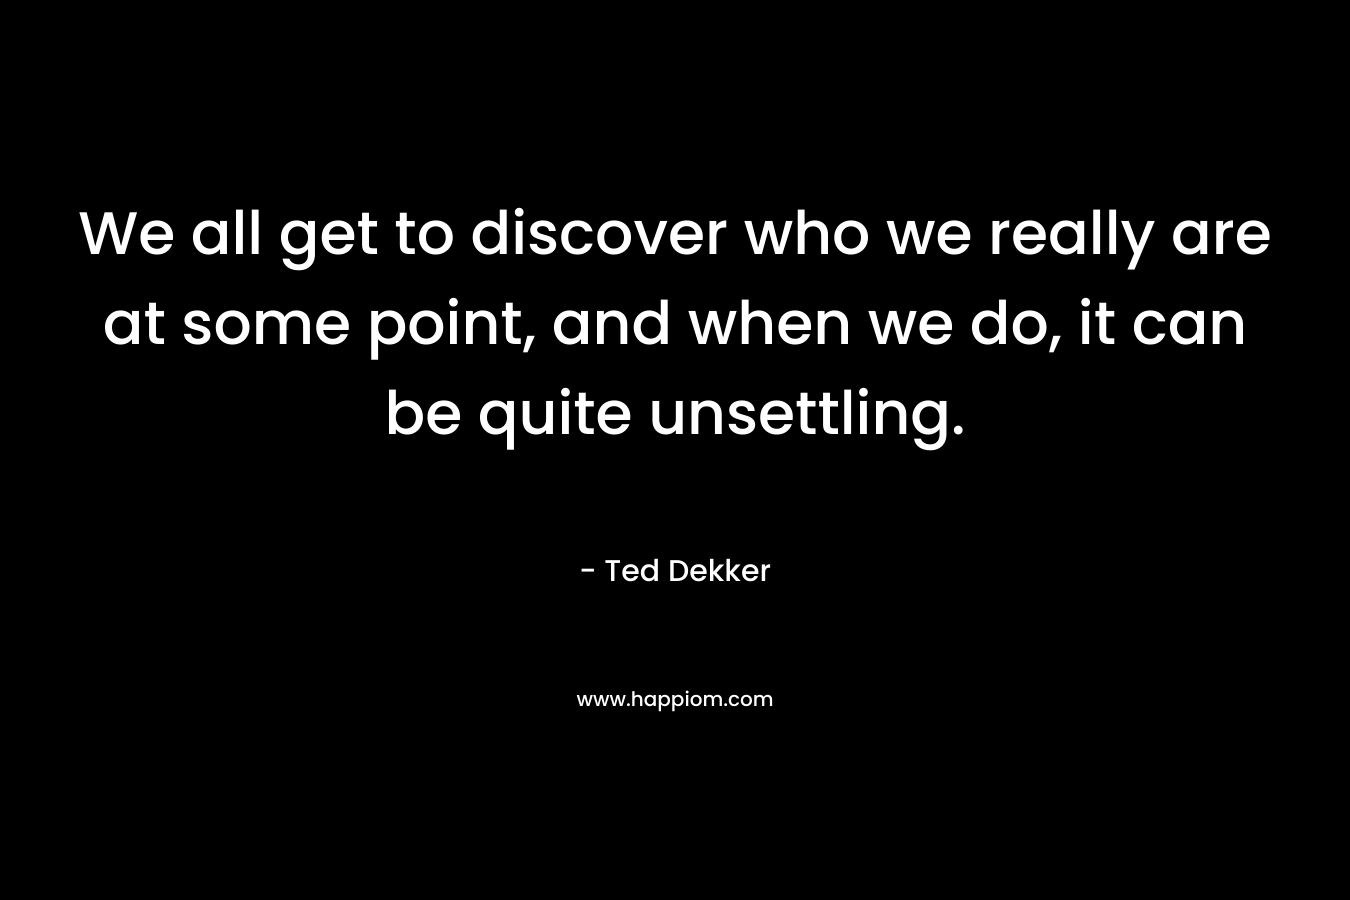 We all get to discover who we really are at some point, and when we do, it can be quite unsettling. – Ted Dekker